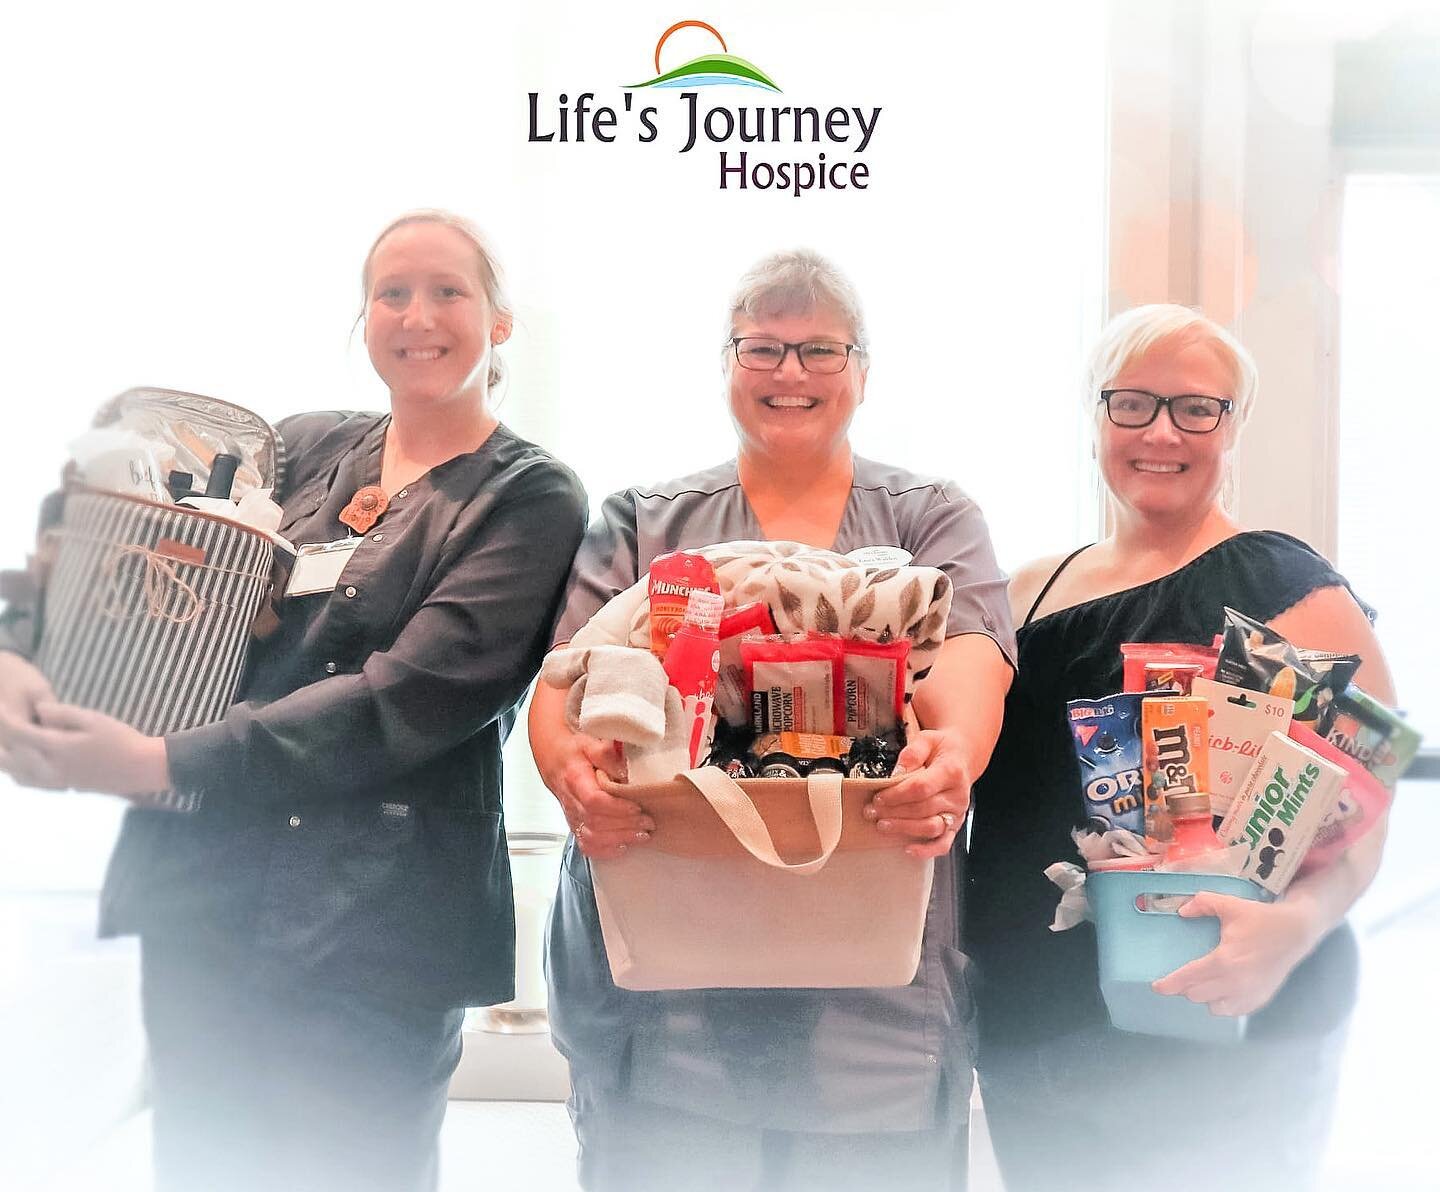 The staff are the heart of our hospice! ✨🌟🎉
Congrats to these lovey ladies! They were big winners in last evening's sip, chat, and snack party for our amazing Life's Journey Team! What a great time just chilling out and telling stories of our hospi